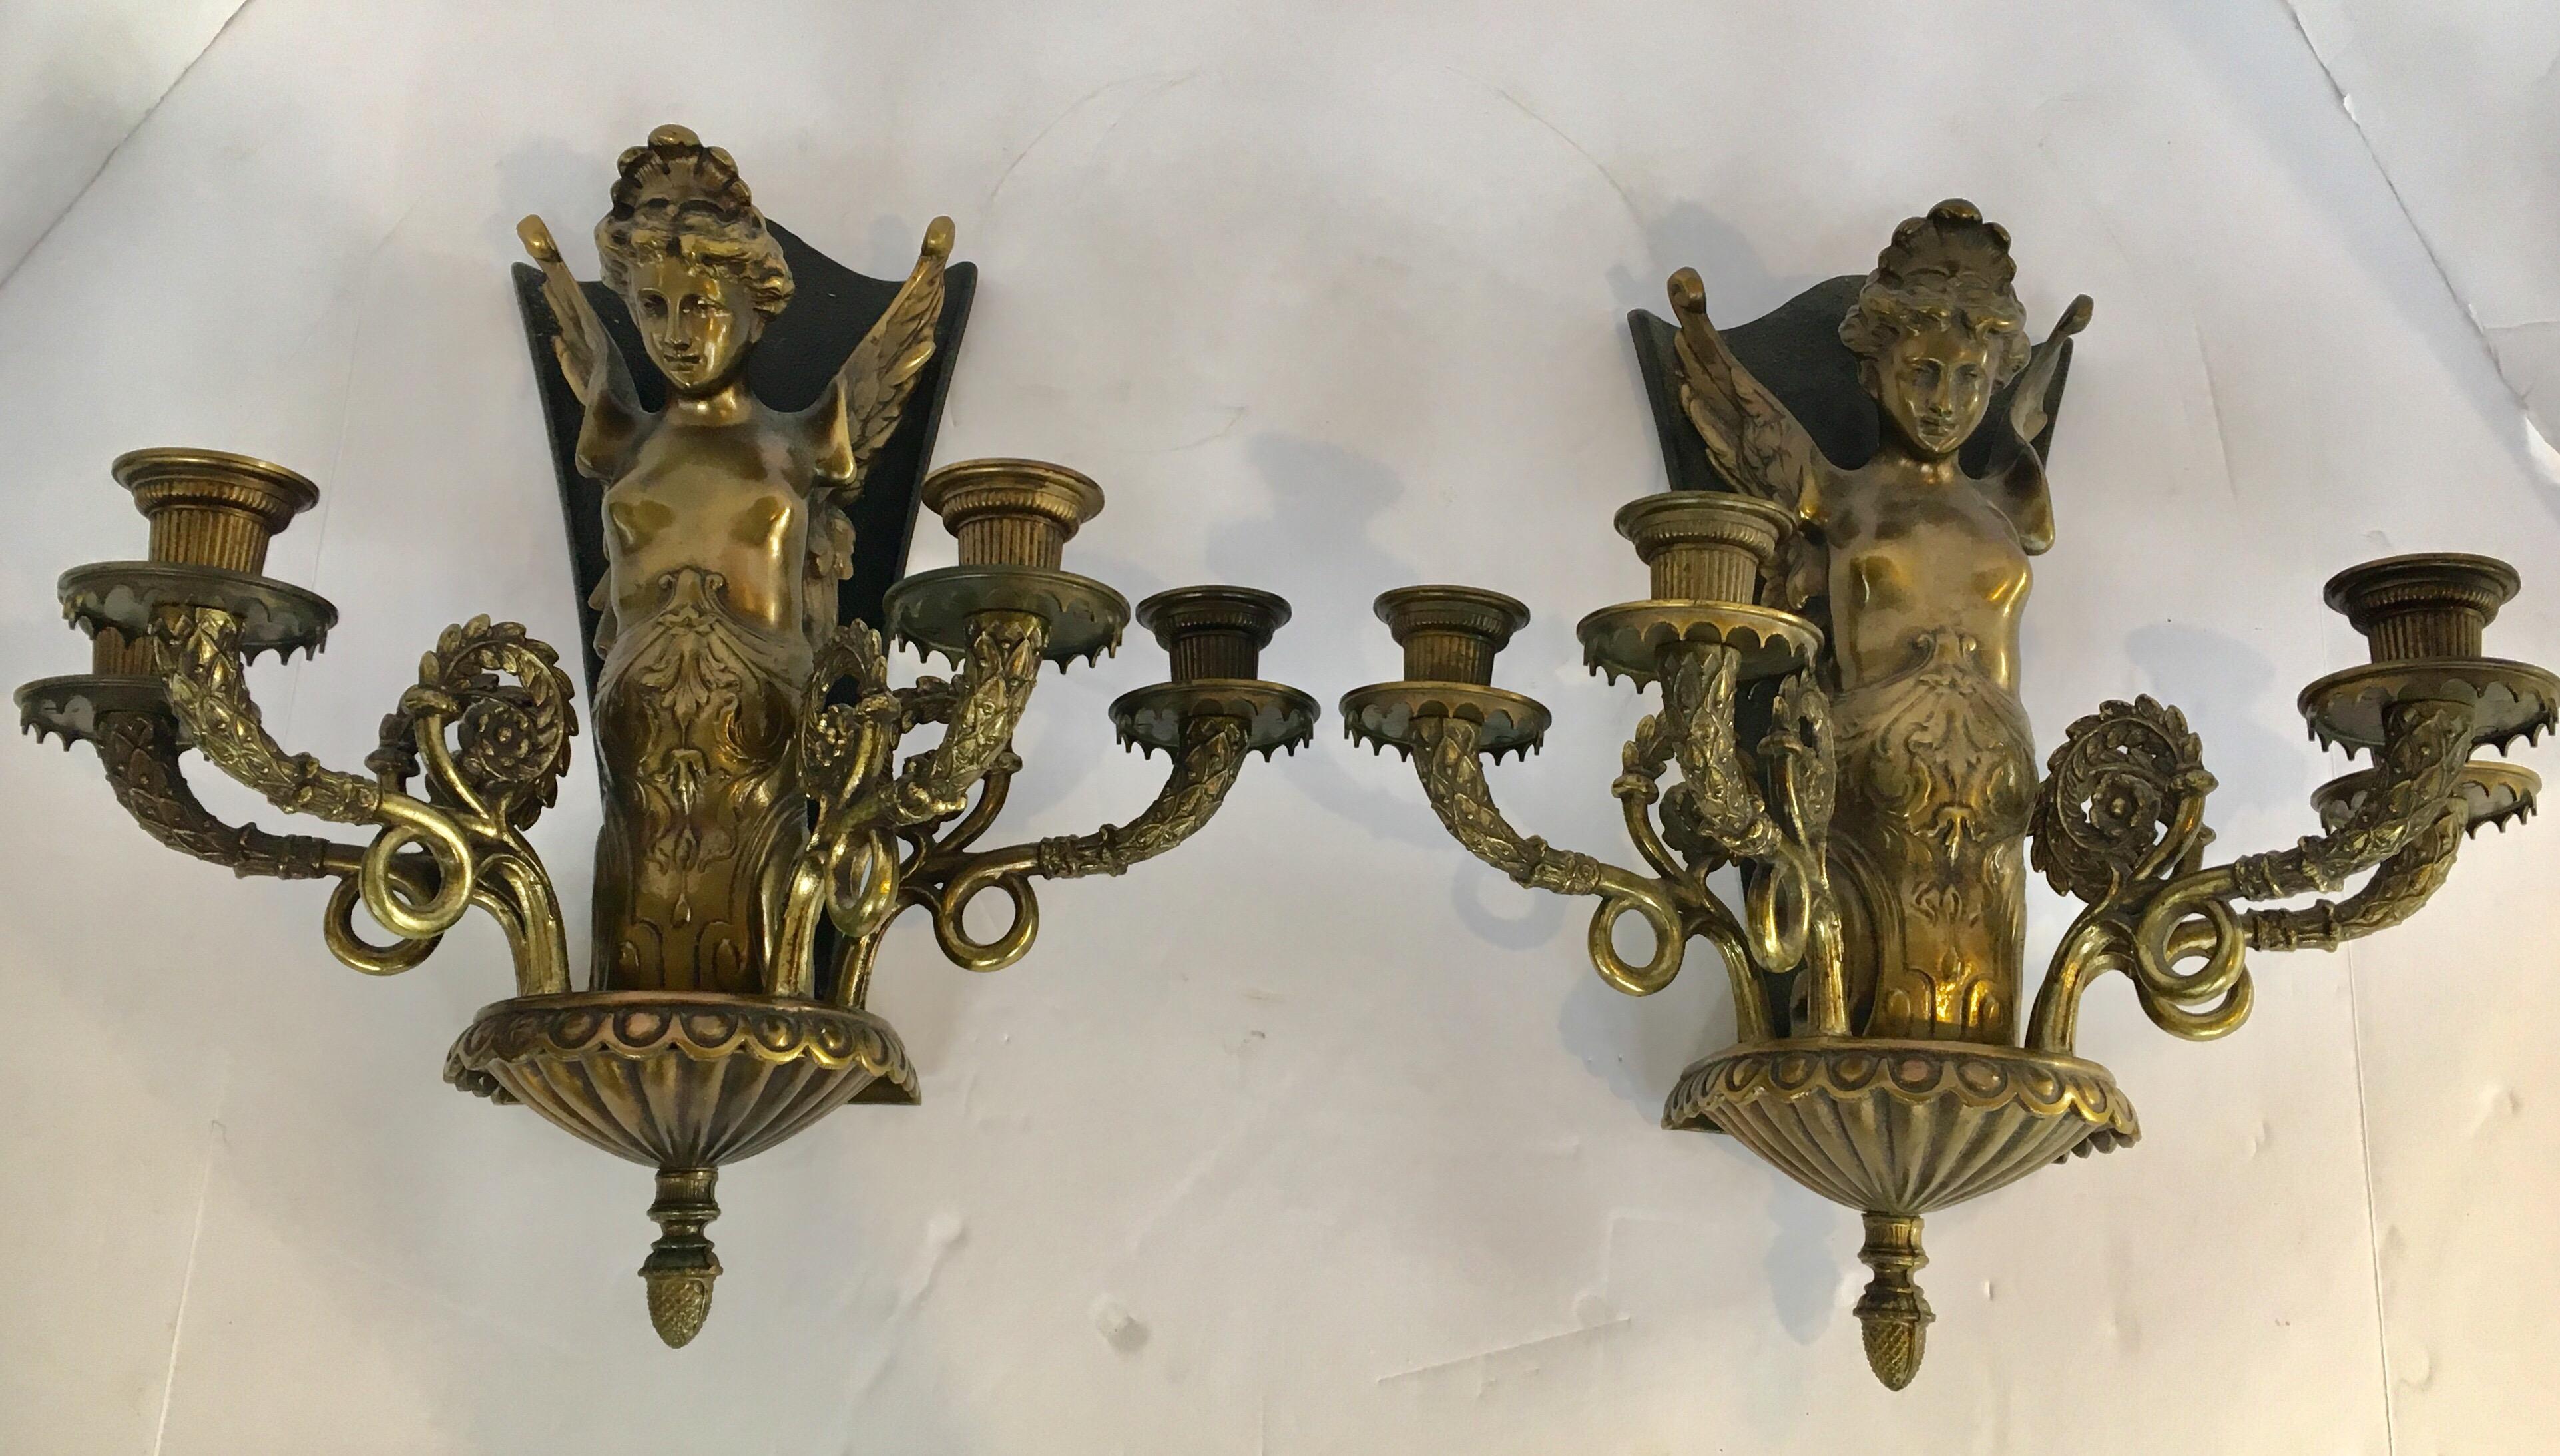 Gorgeous pair of matching heavy bronze wall sconces with four arms each. At center is a winged, topless woman.